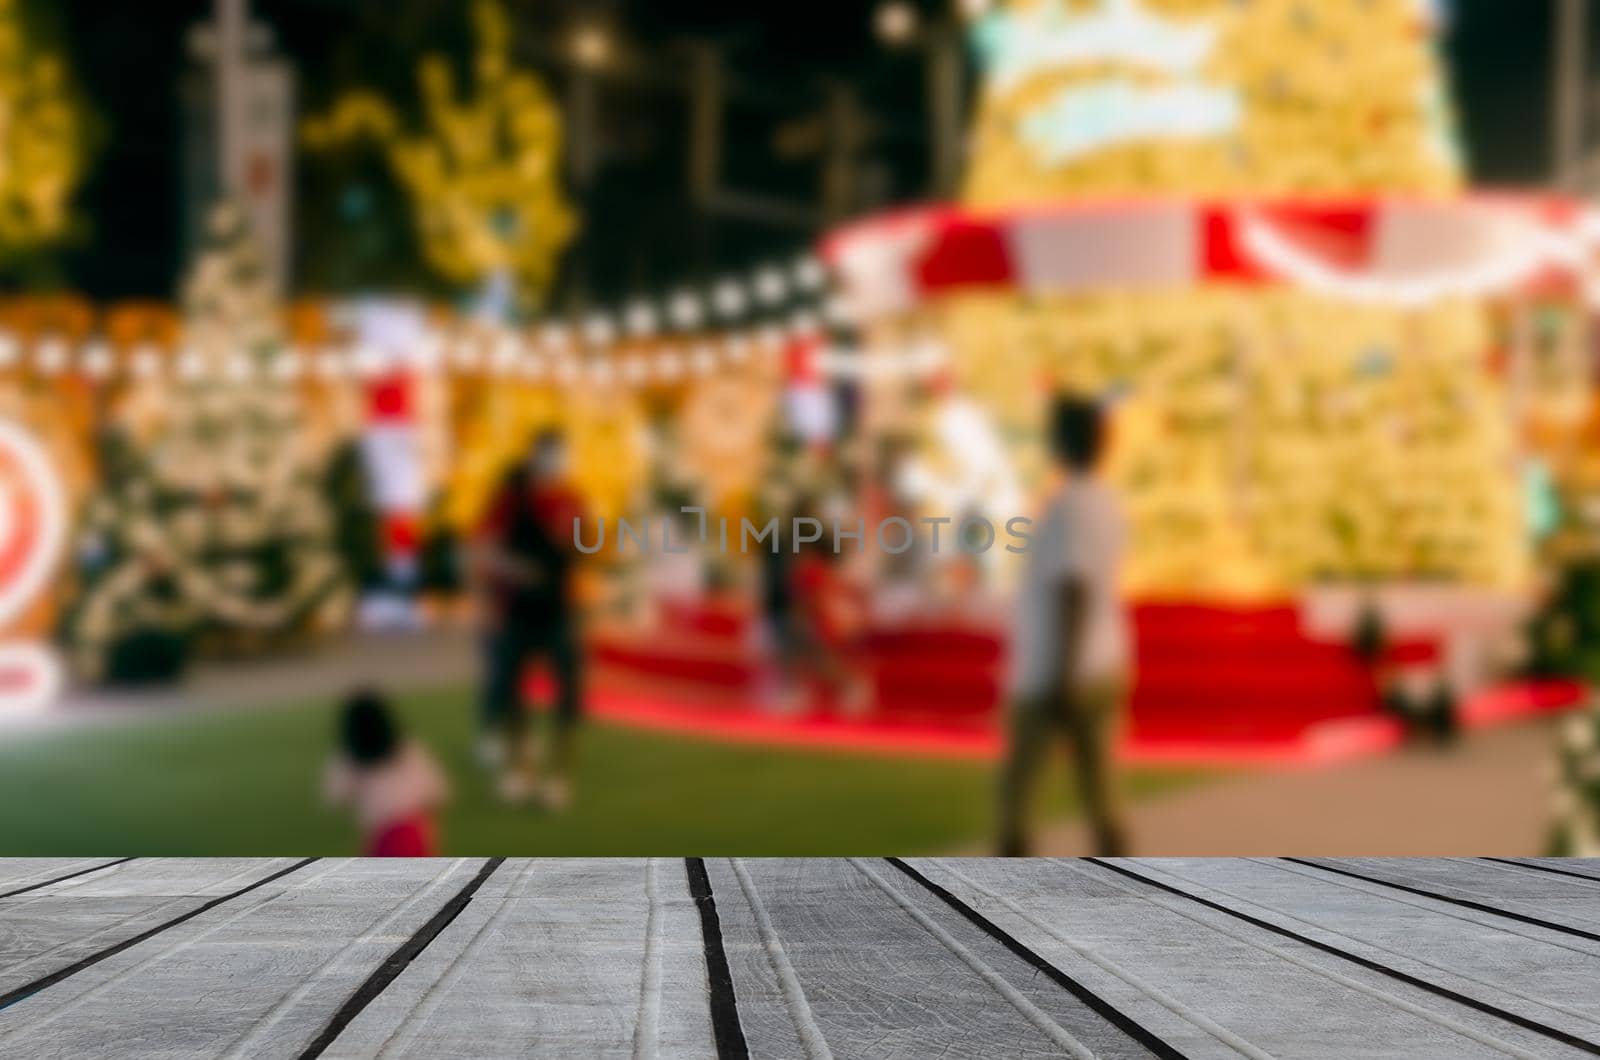 wood table top product empty counter abstract blur background person bokeh light festive decoration display vintage retro tone.